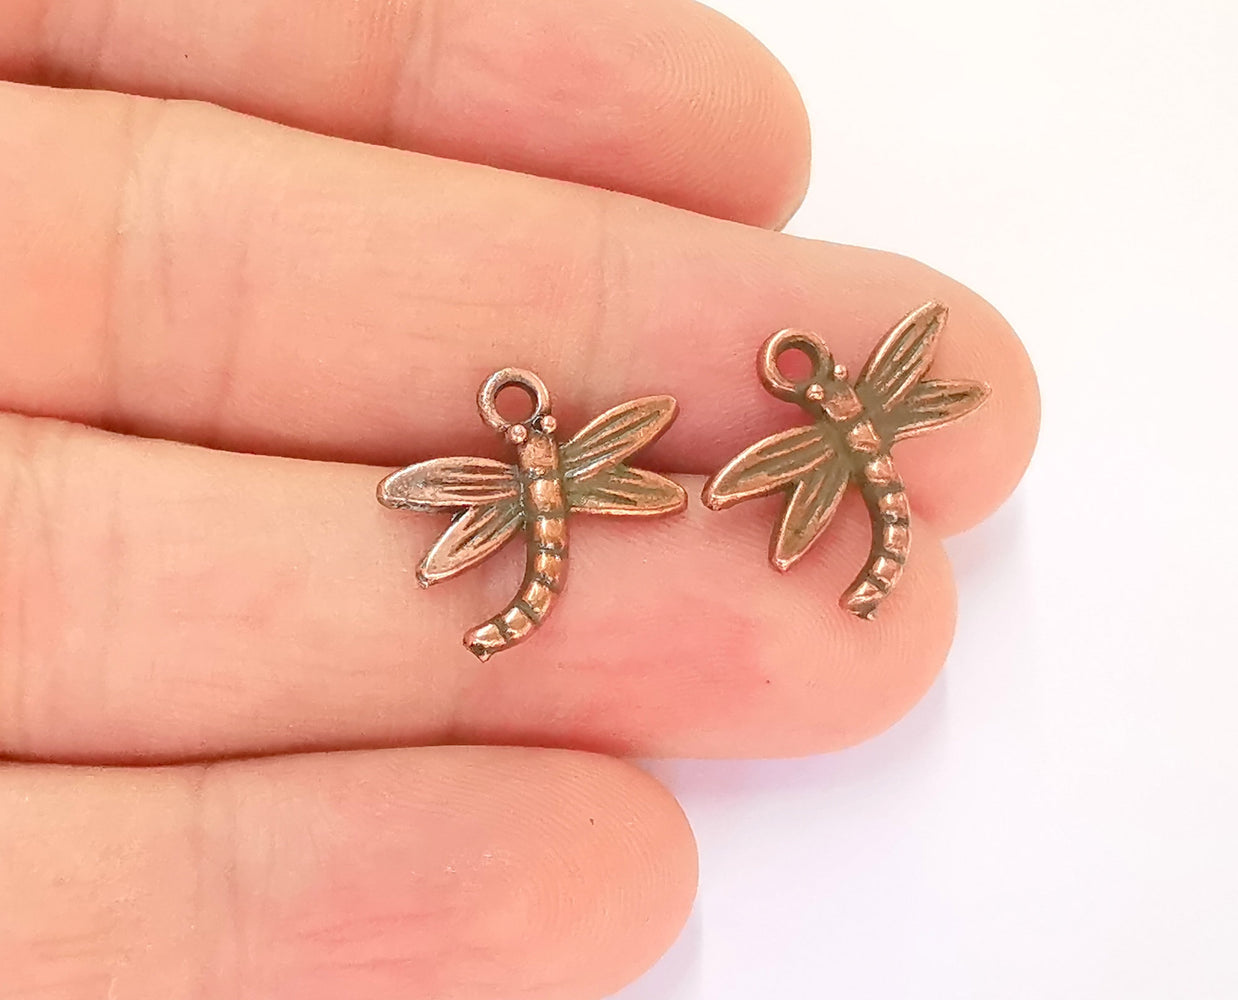 10 Dragonfly Charms Antique Copper Plated Charm (18x18mm) G23254